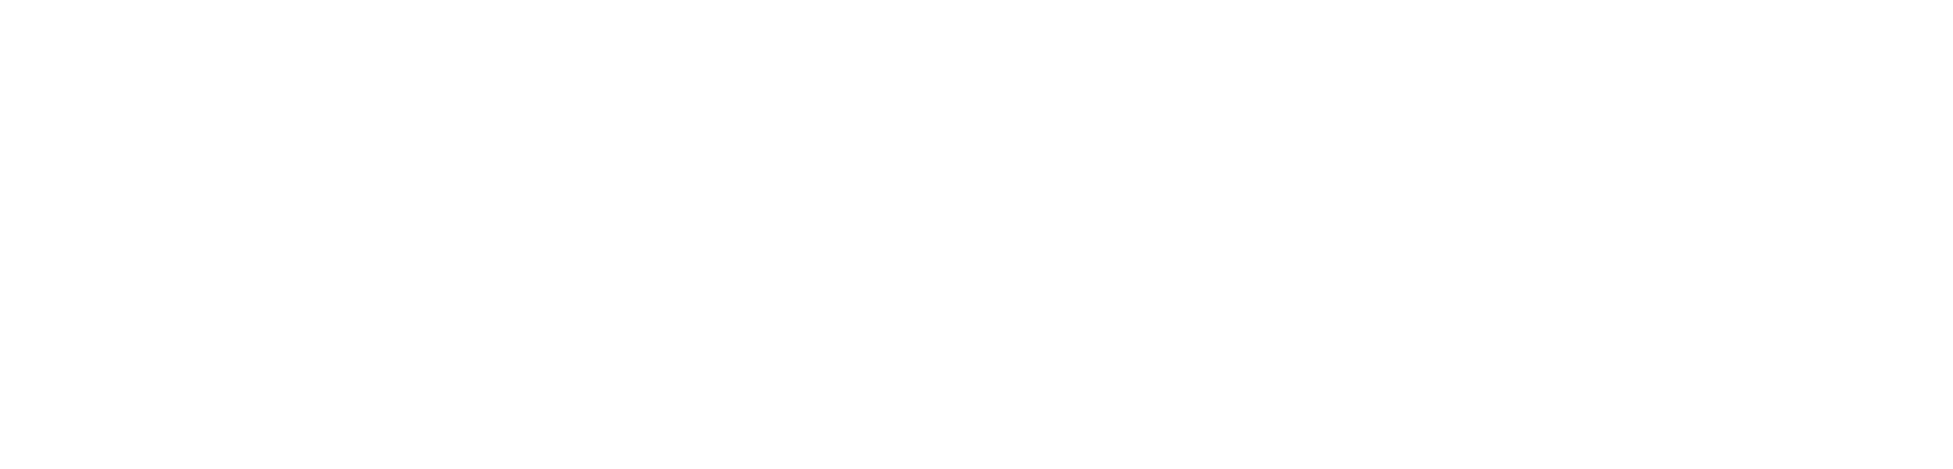 Screen Skillnet is co-funded by Skillnet Ireland and network companies. Skillnet Ireland is funded from the National Training Fund through the Department of Further and Higher Education, Research, Innovation and Science, and the European Union